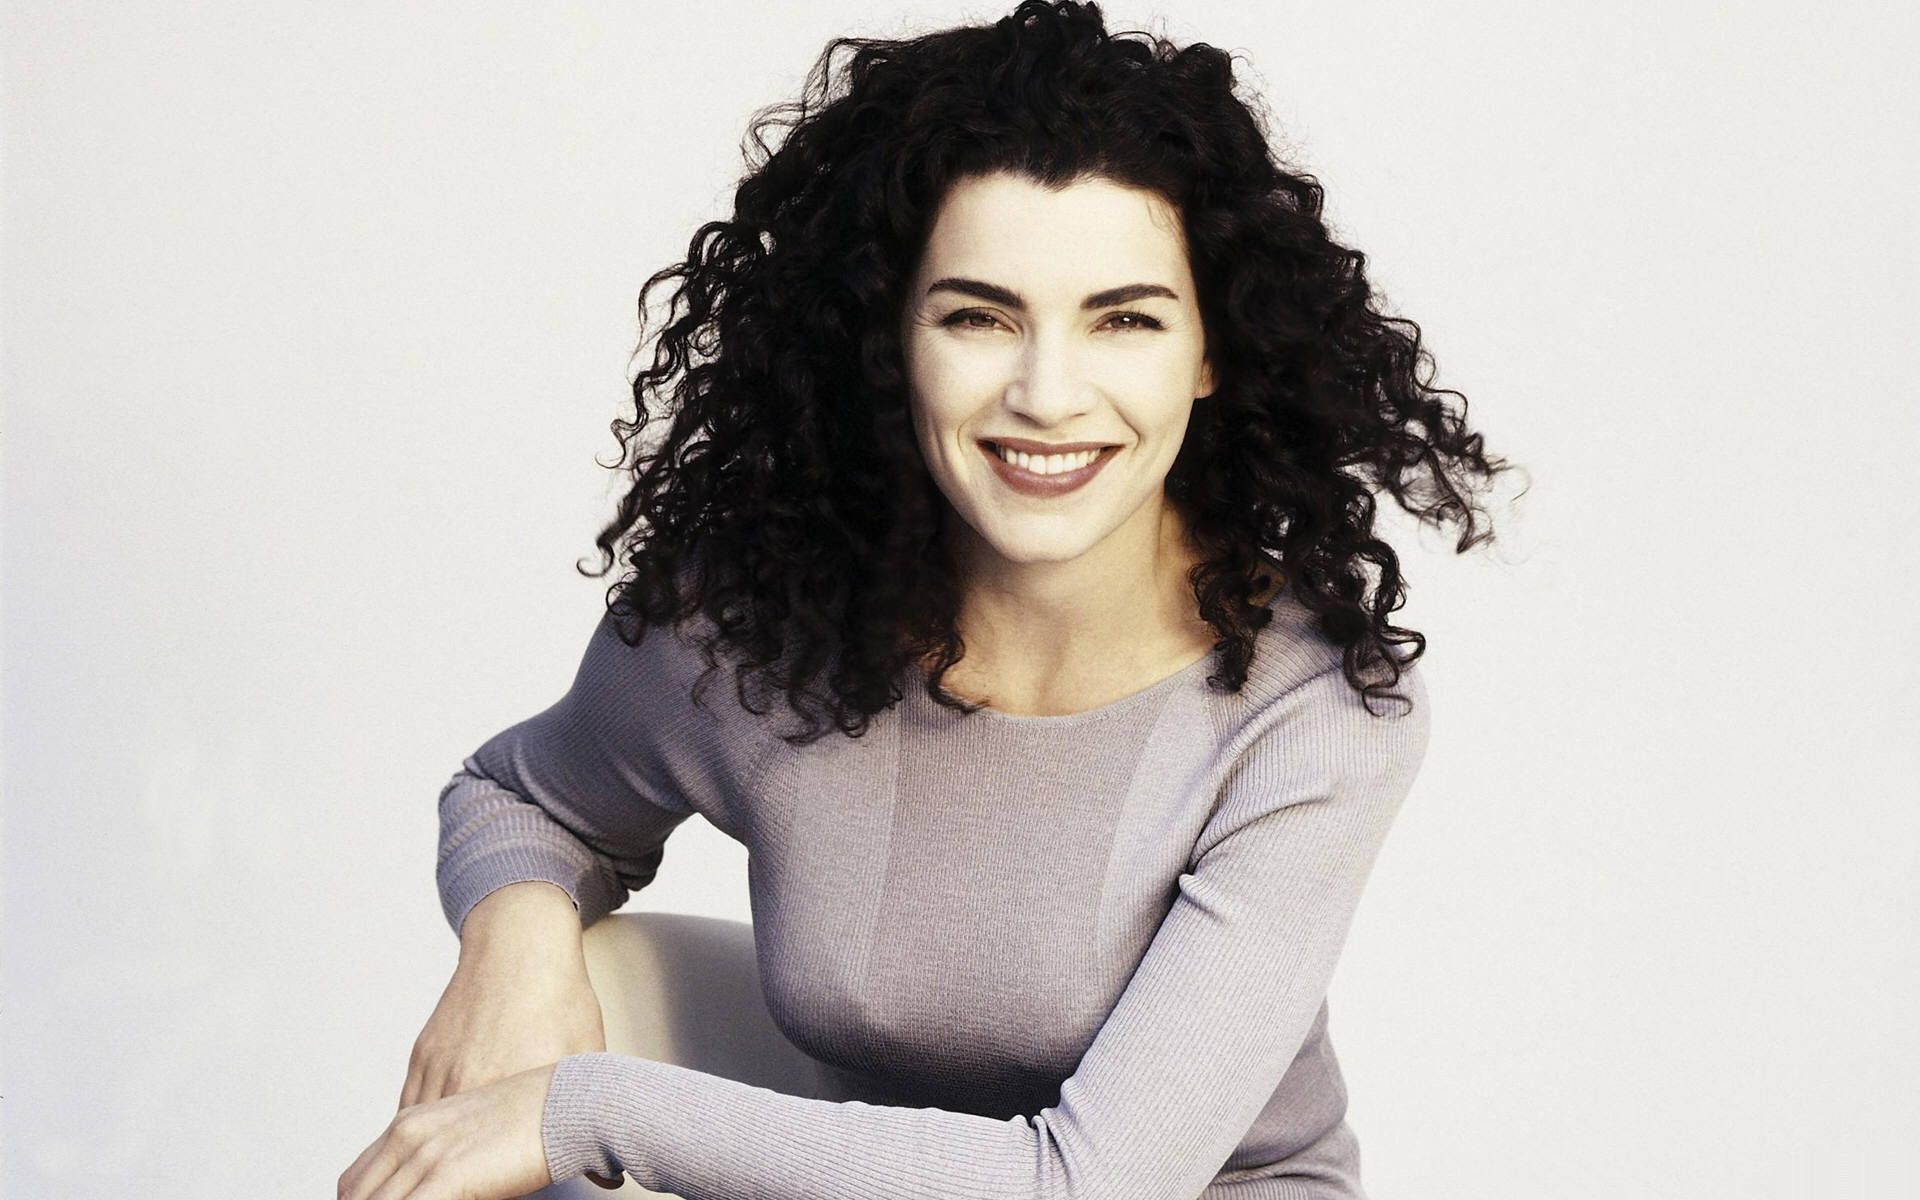 Julianna Margulies Wallpapers High Resolution and Quality Download.